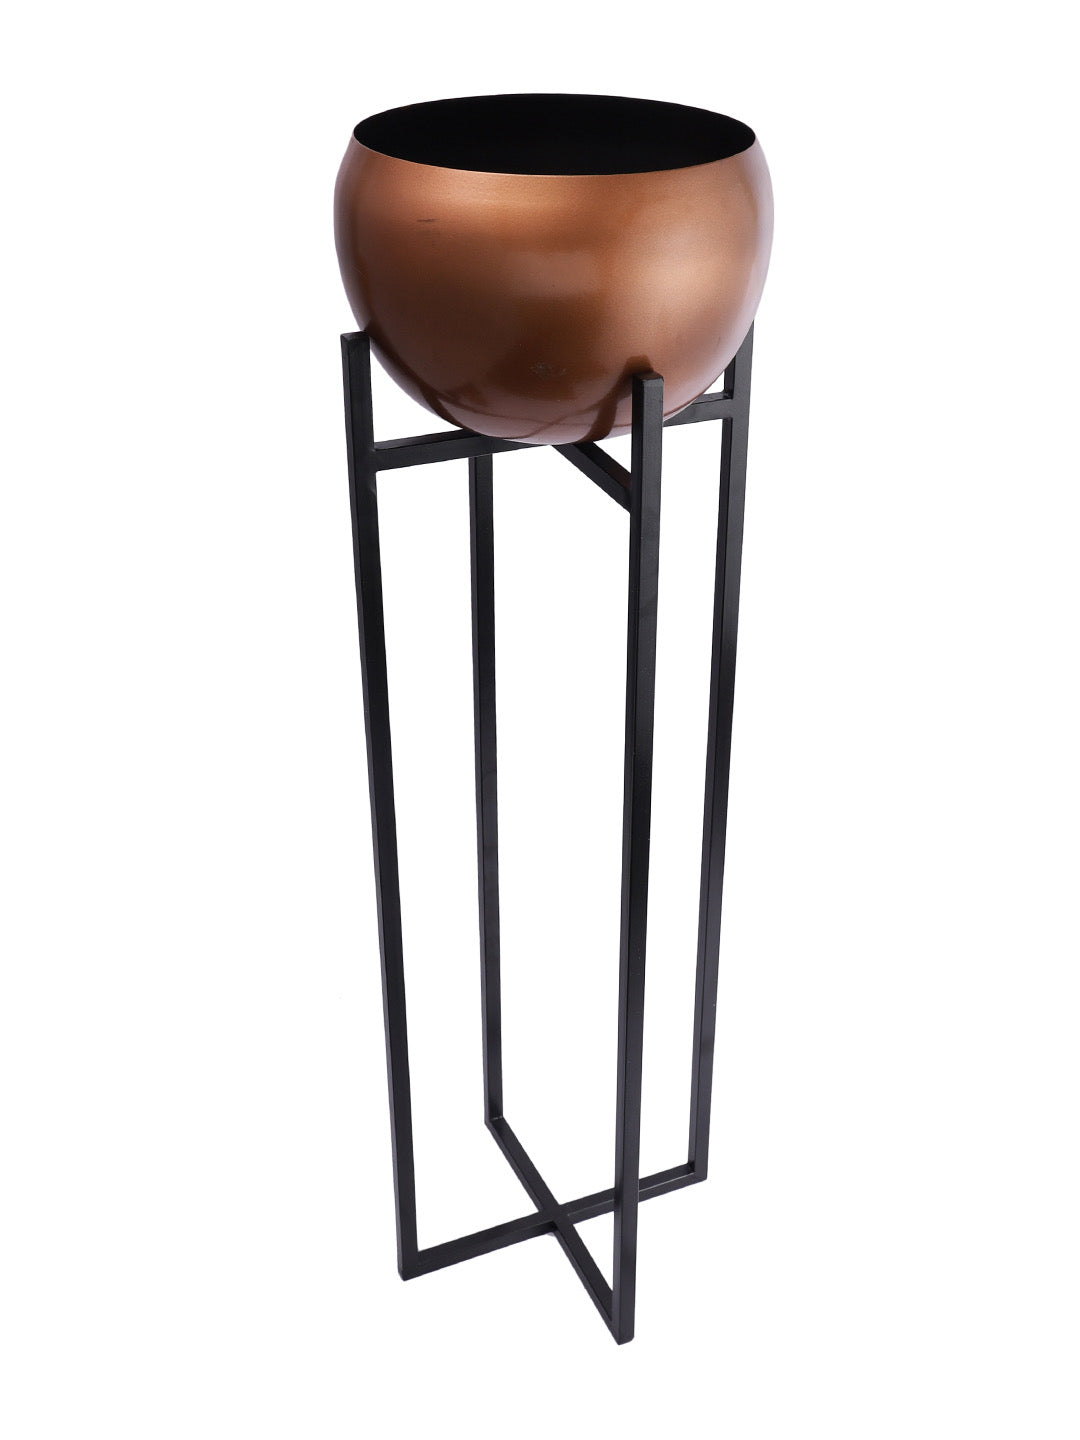 Metal Planter with Stand - Default Title (CHM2124)